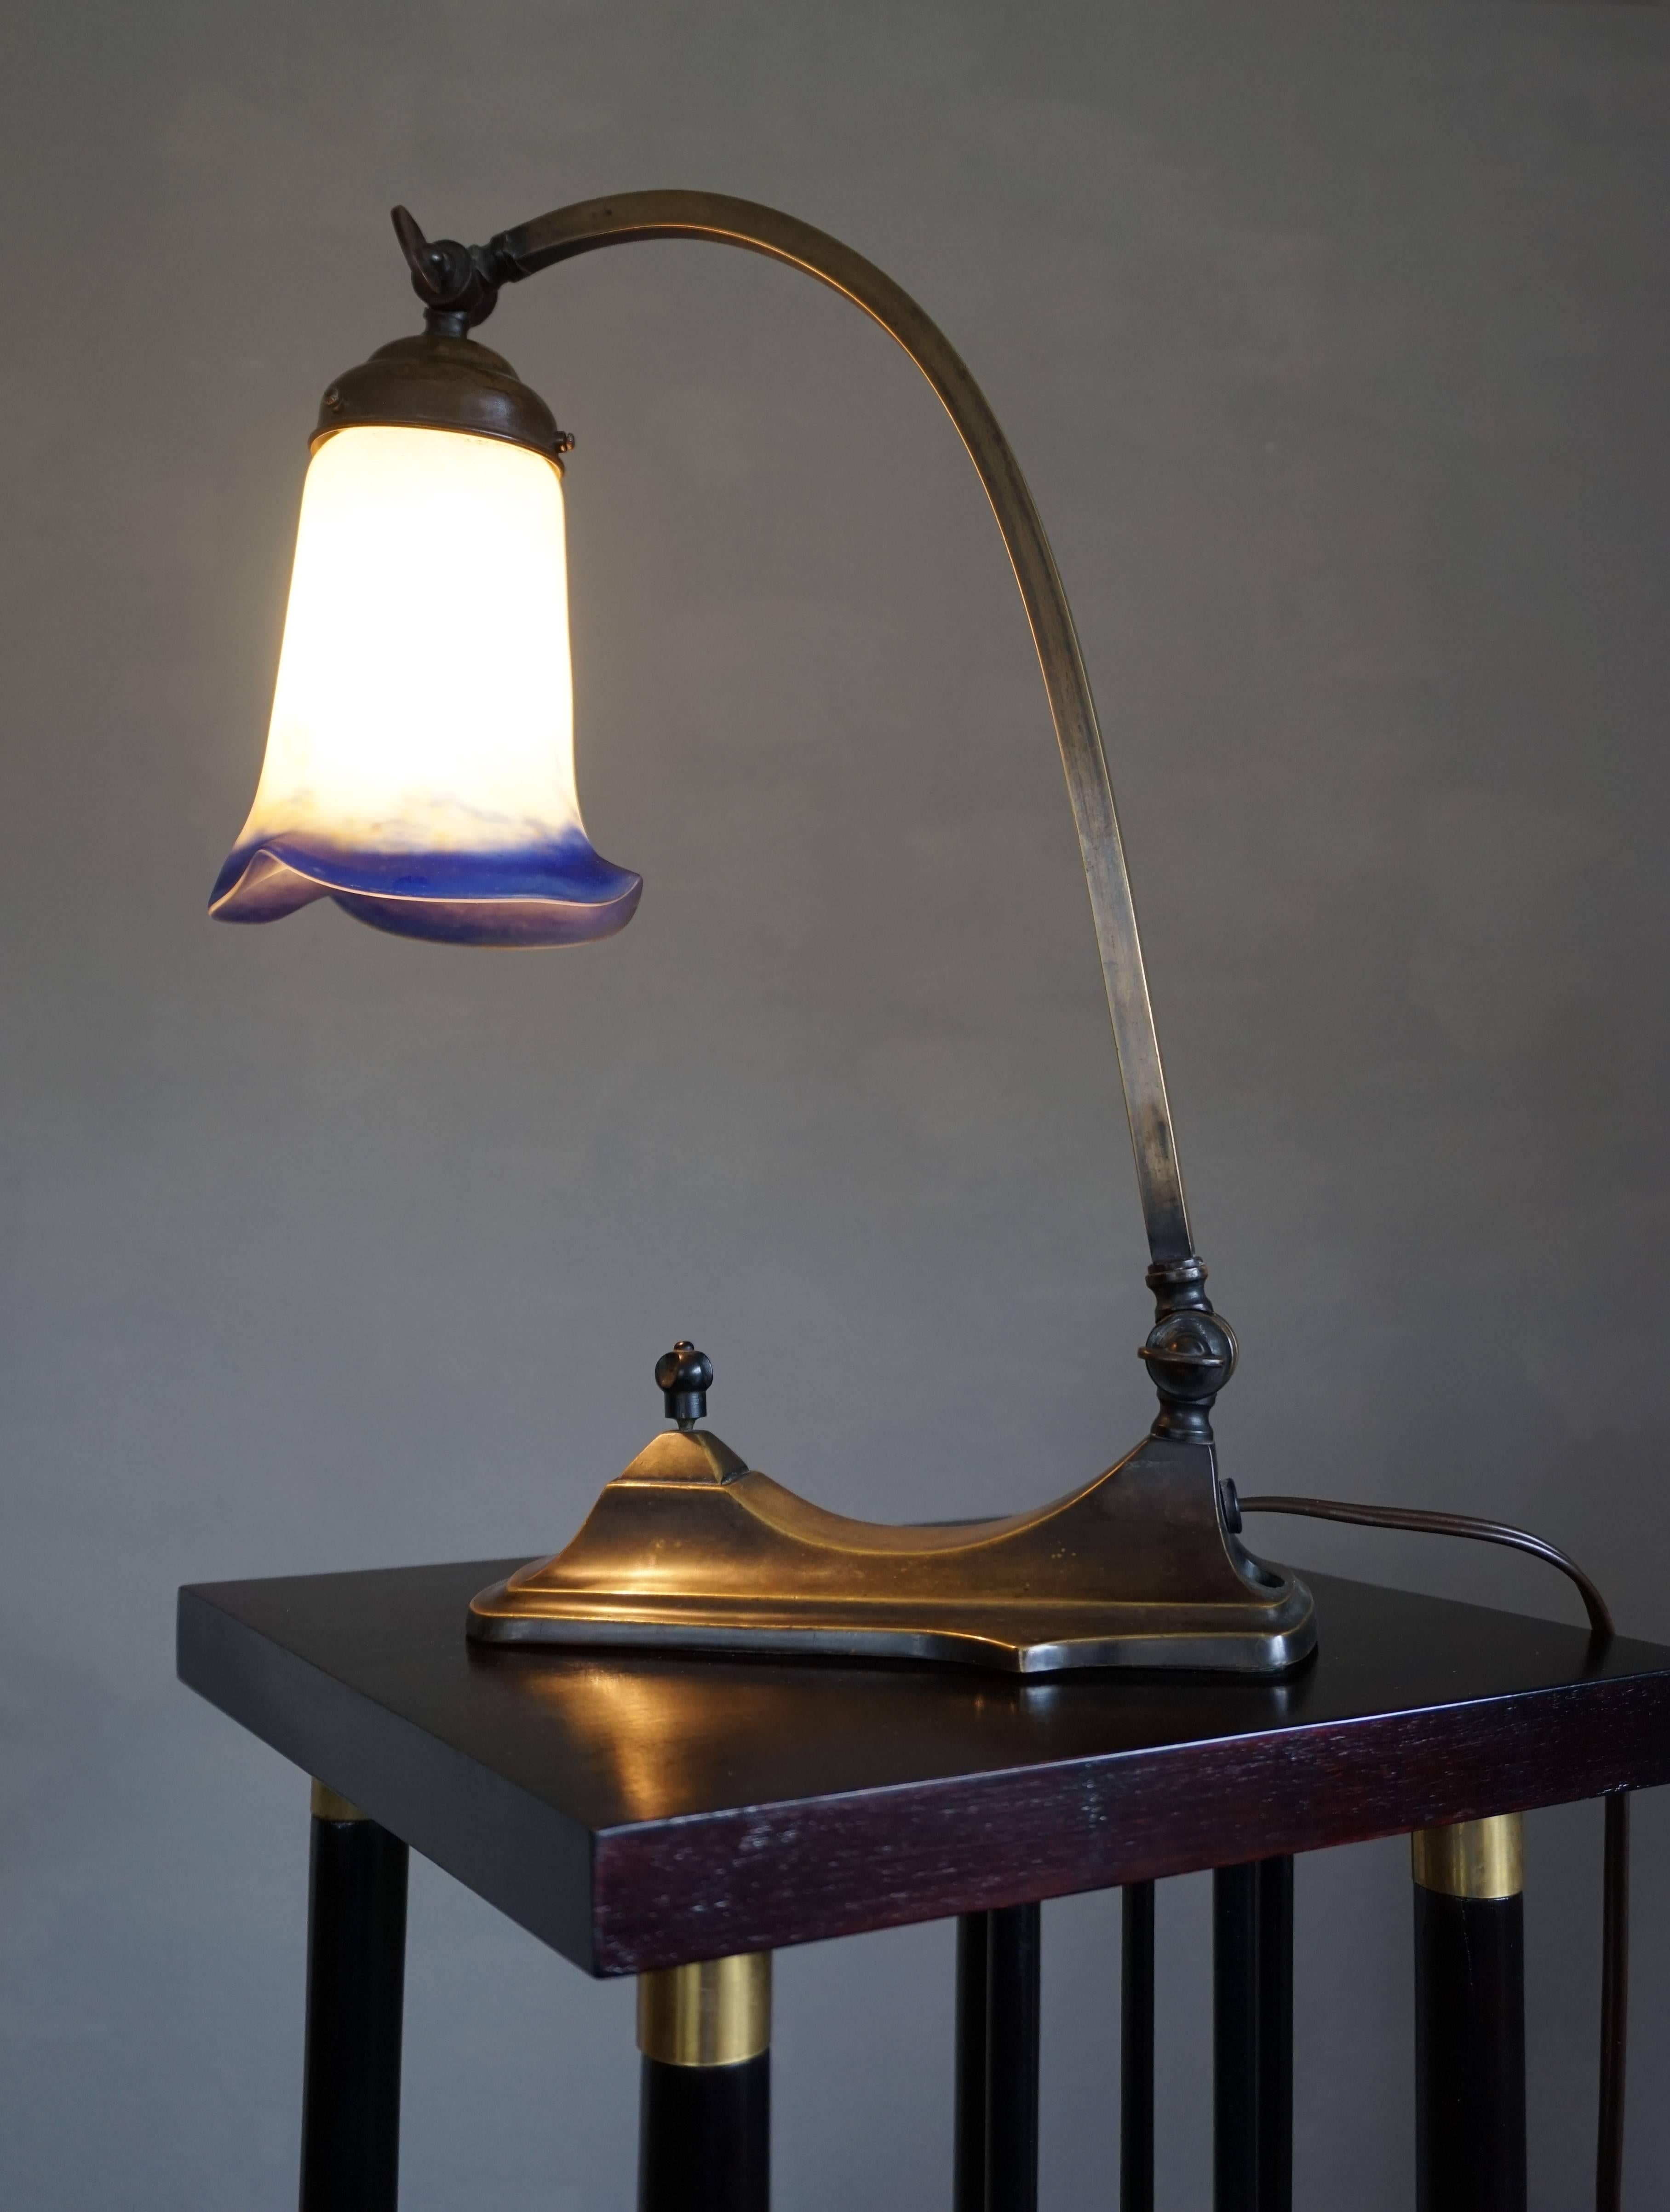 Very well designed and top quality made, French table lamp.

This rare and stylish Art Deco table lamp is a joy to look at, both with the light switched on and off. With an adjustable arm and shade this lamp also is very practical. The timeless